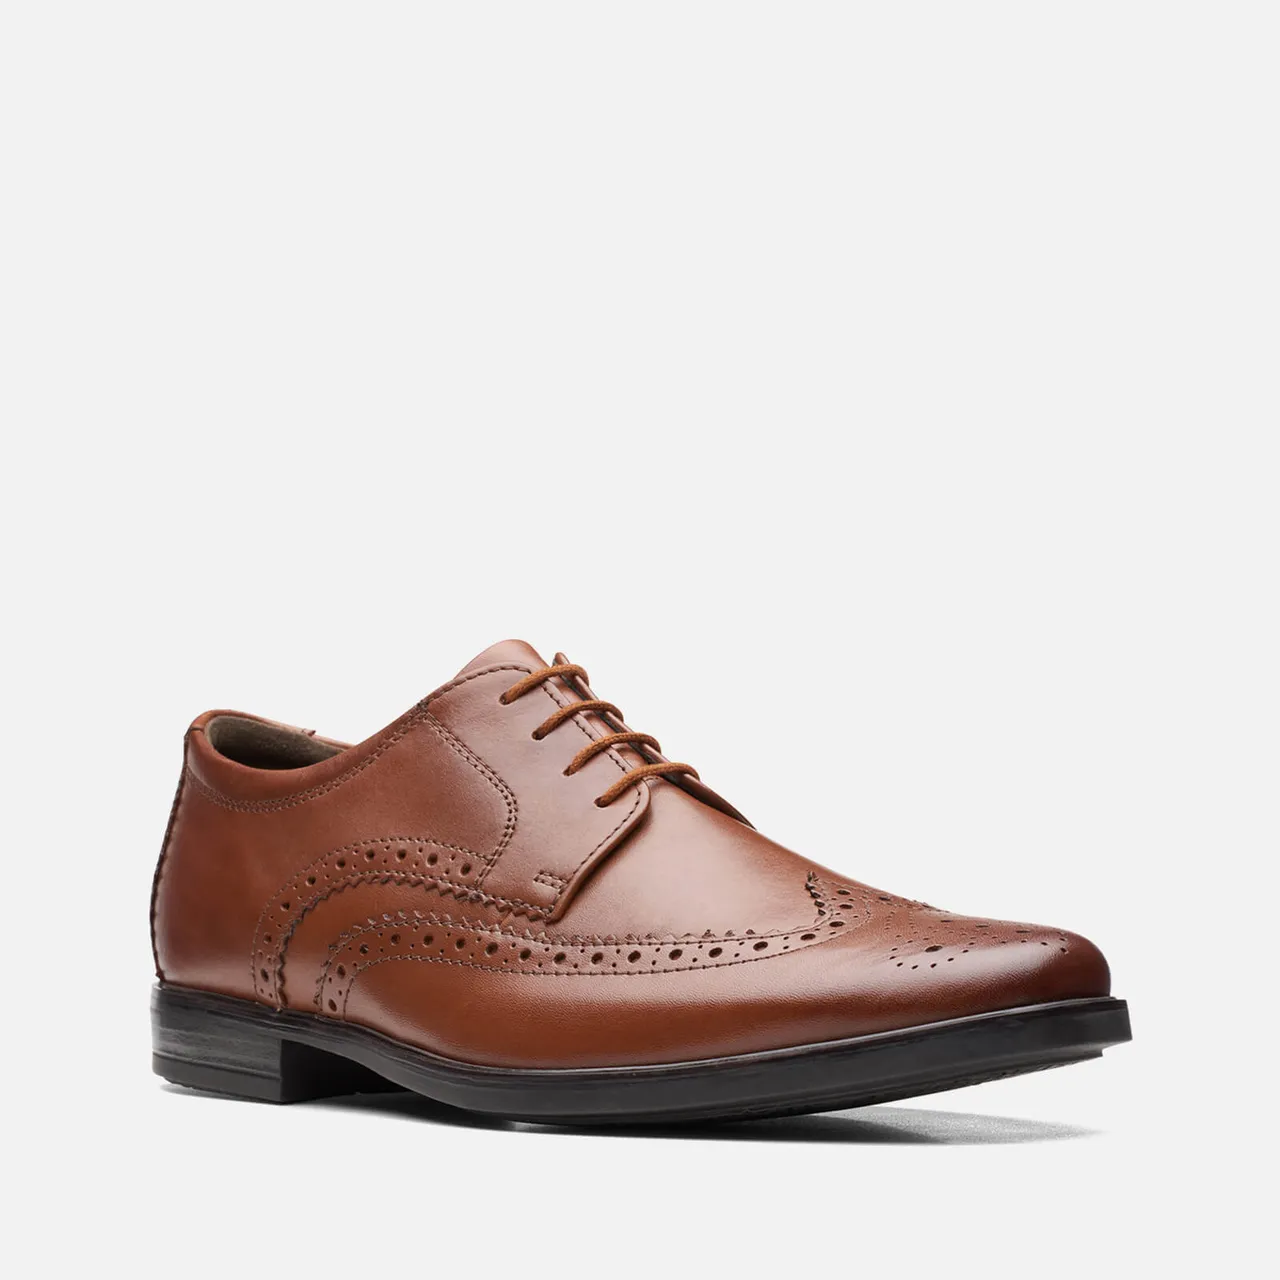 Clarks Howard Wing Leather Derby Shoes - UK